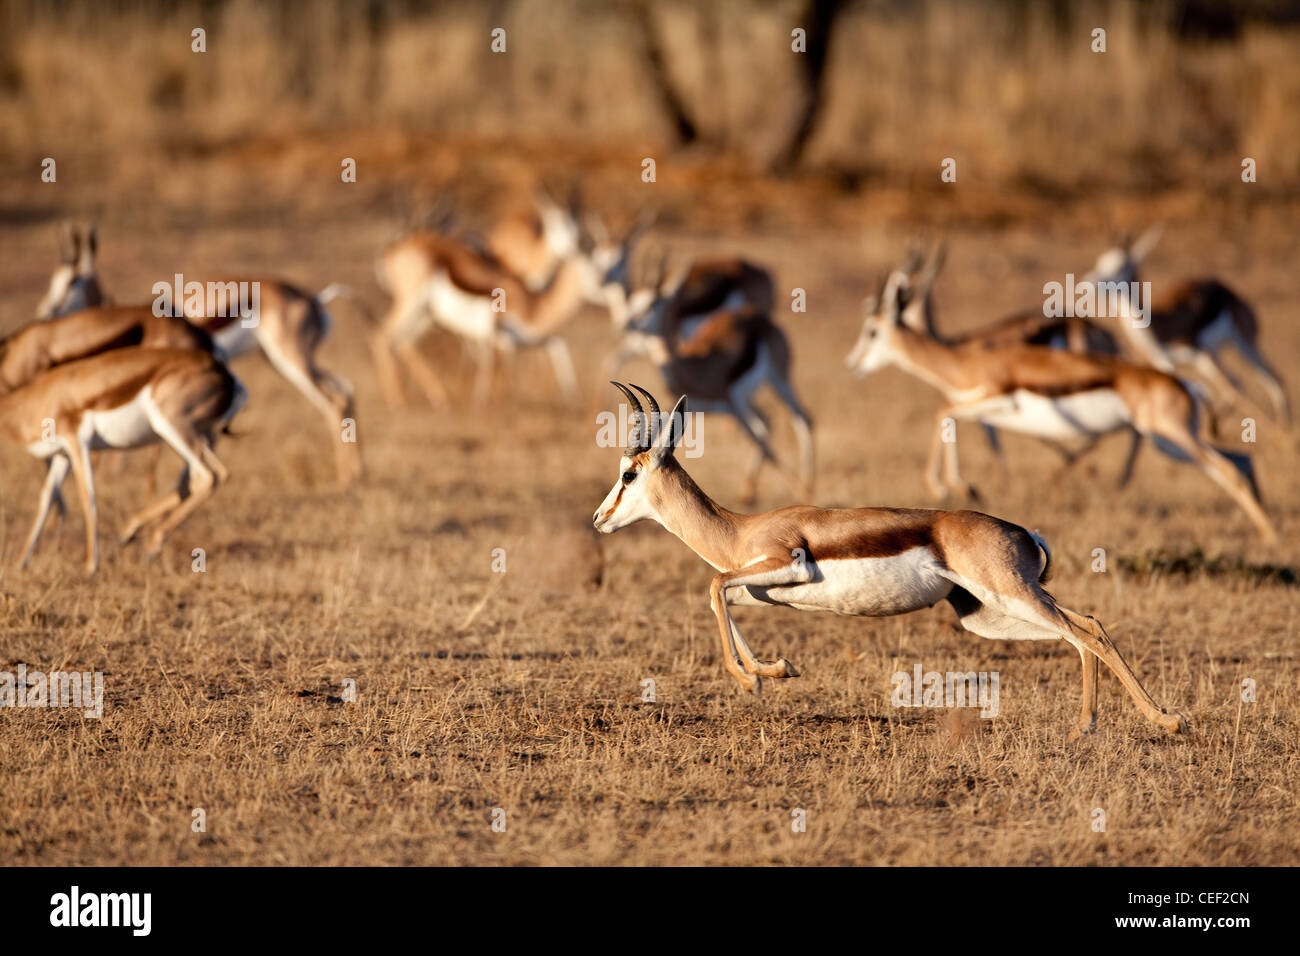 Gazelle Running High Resolution Stock Photography And Images Alamy